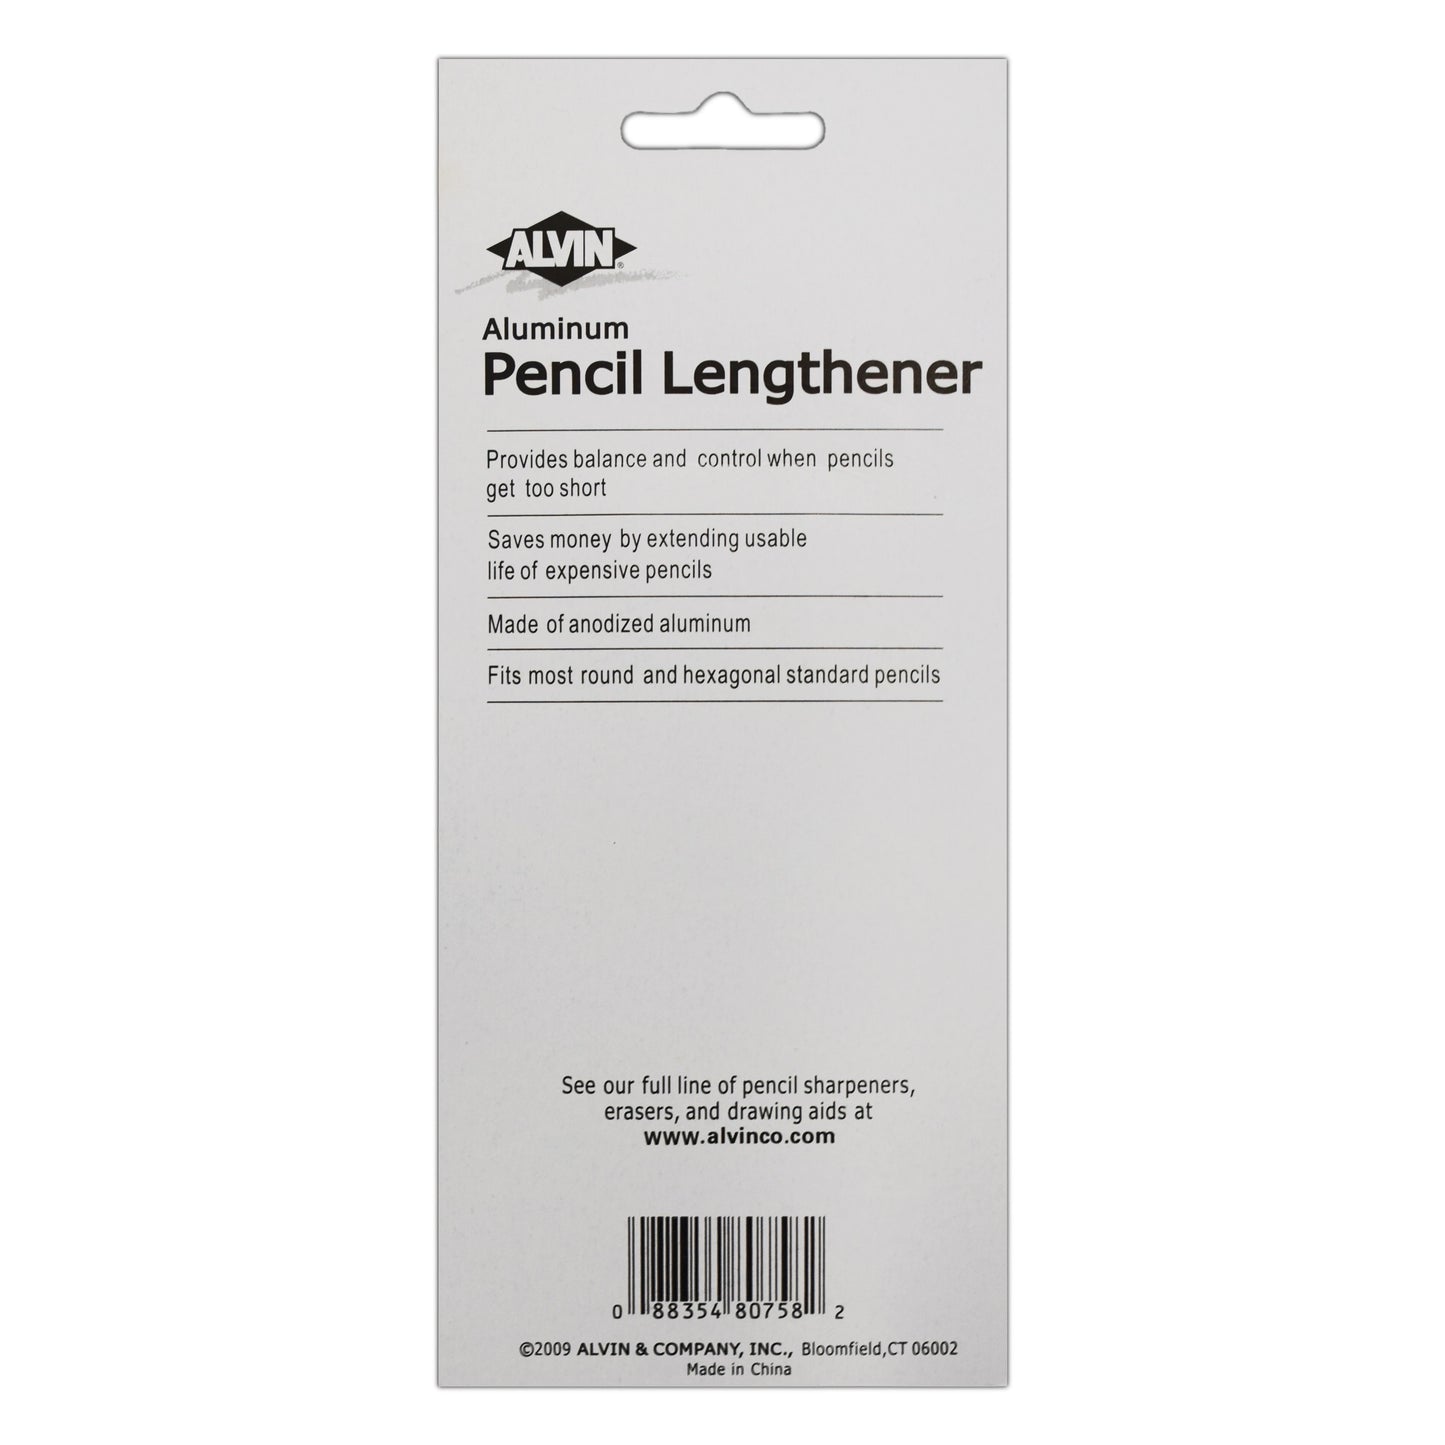 Pencil Lengtheners (3 pack)